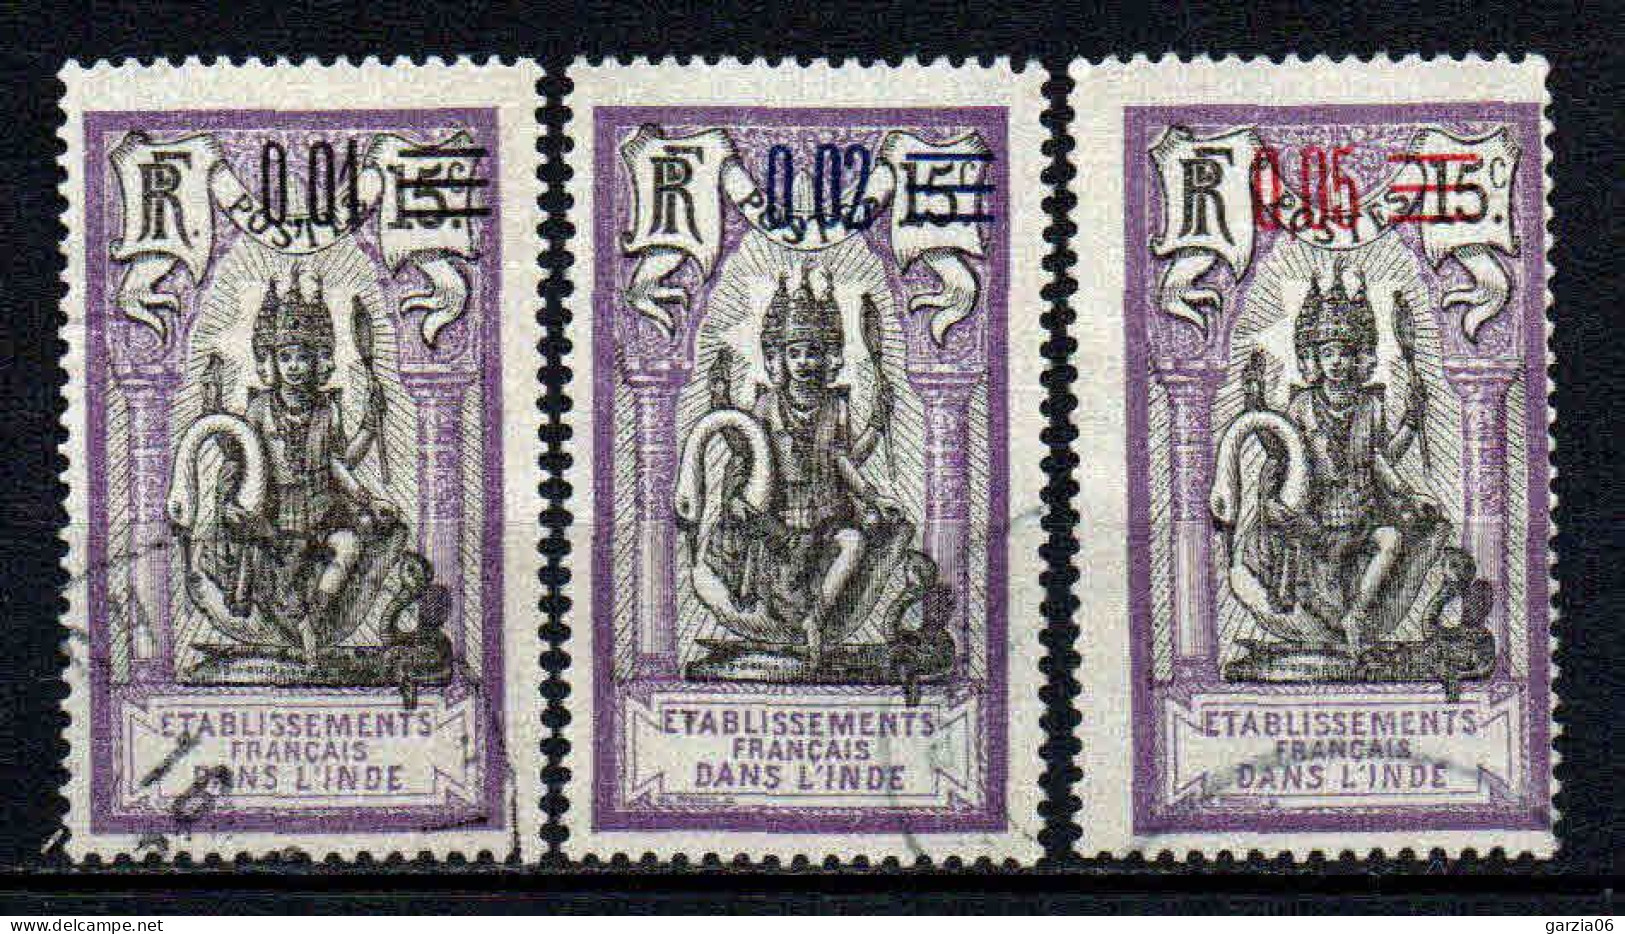 Inde - 1922 - Tb Antérieurs Surch  - N° 56 à 58 - Oblit - Used - Used Stamps